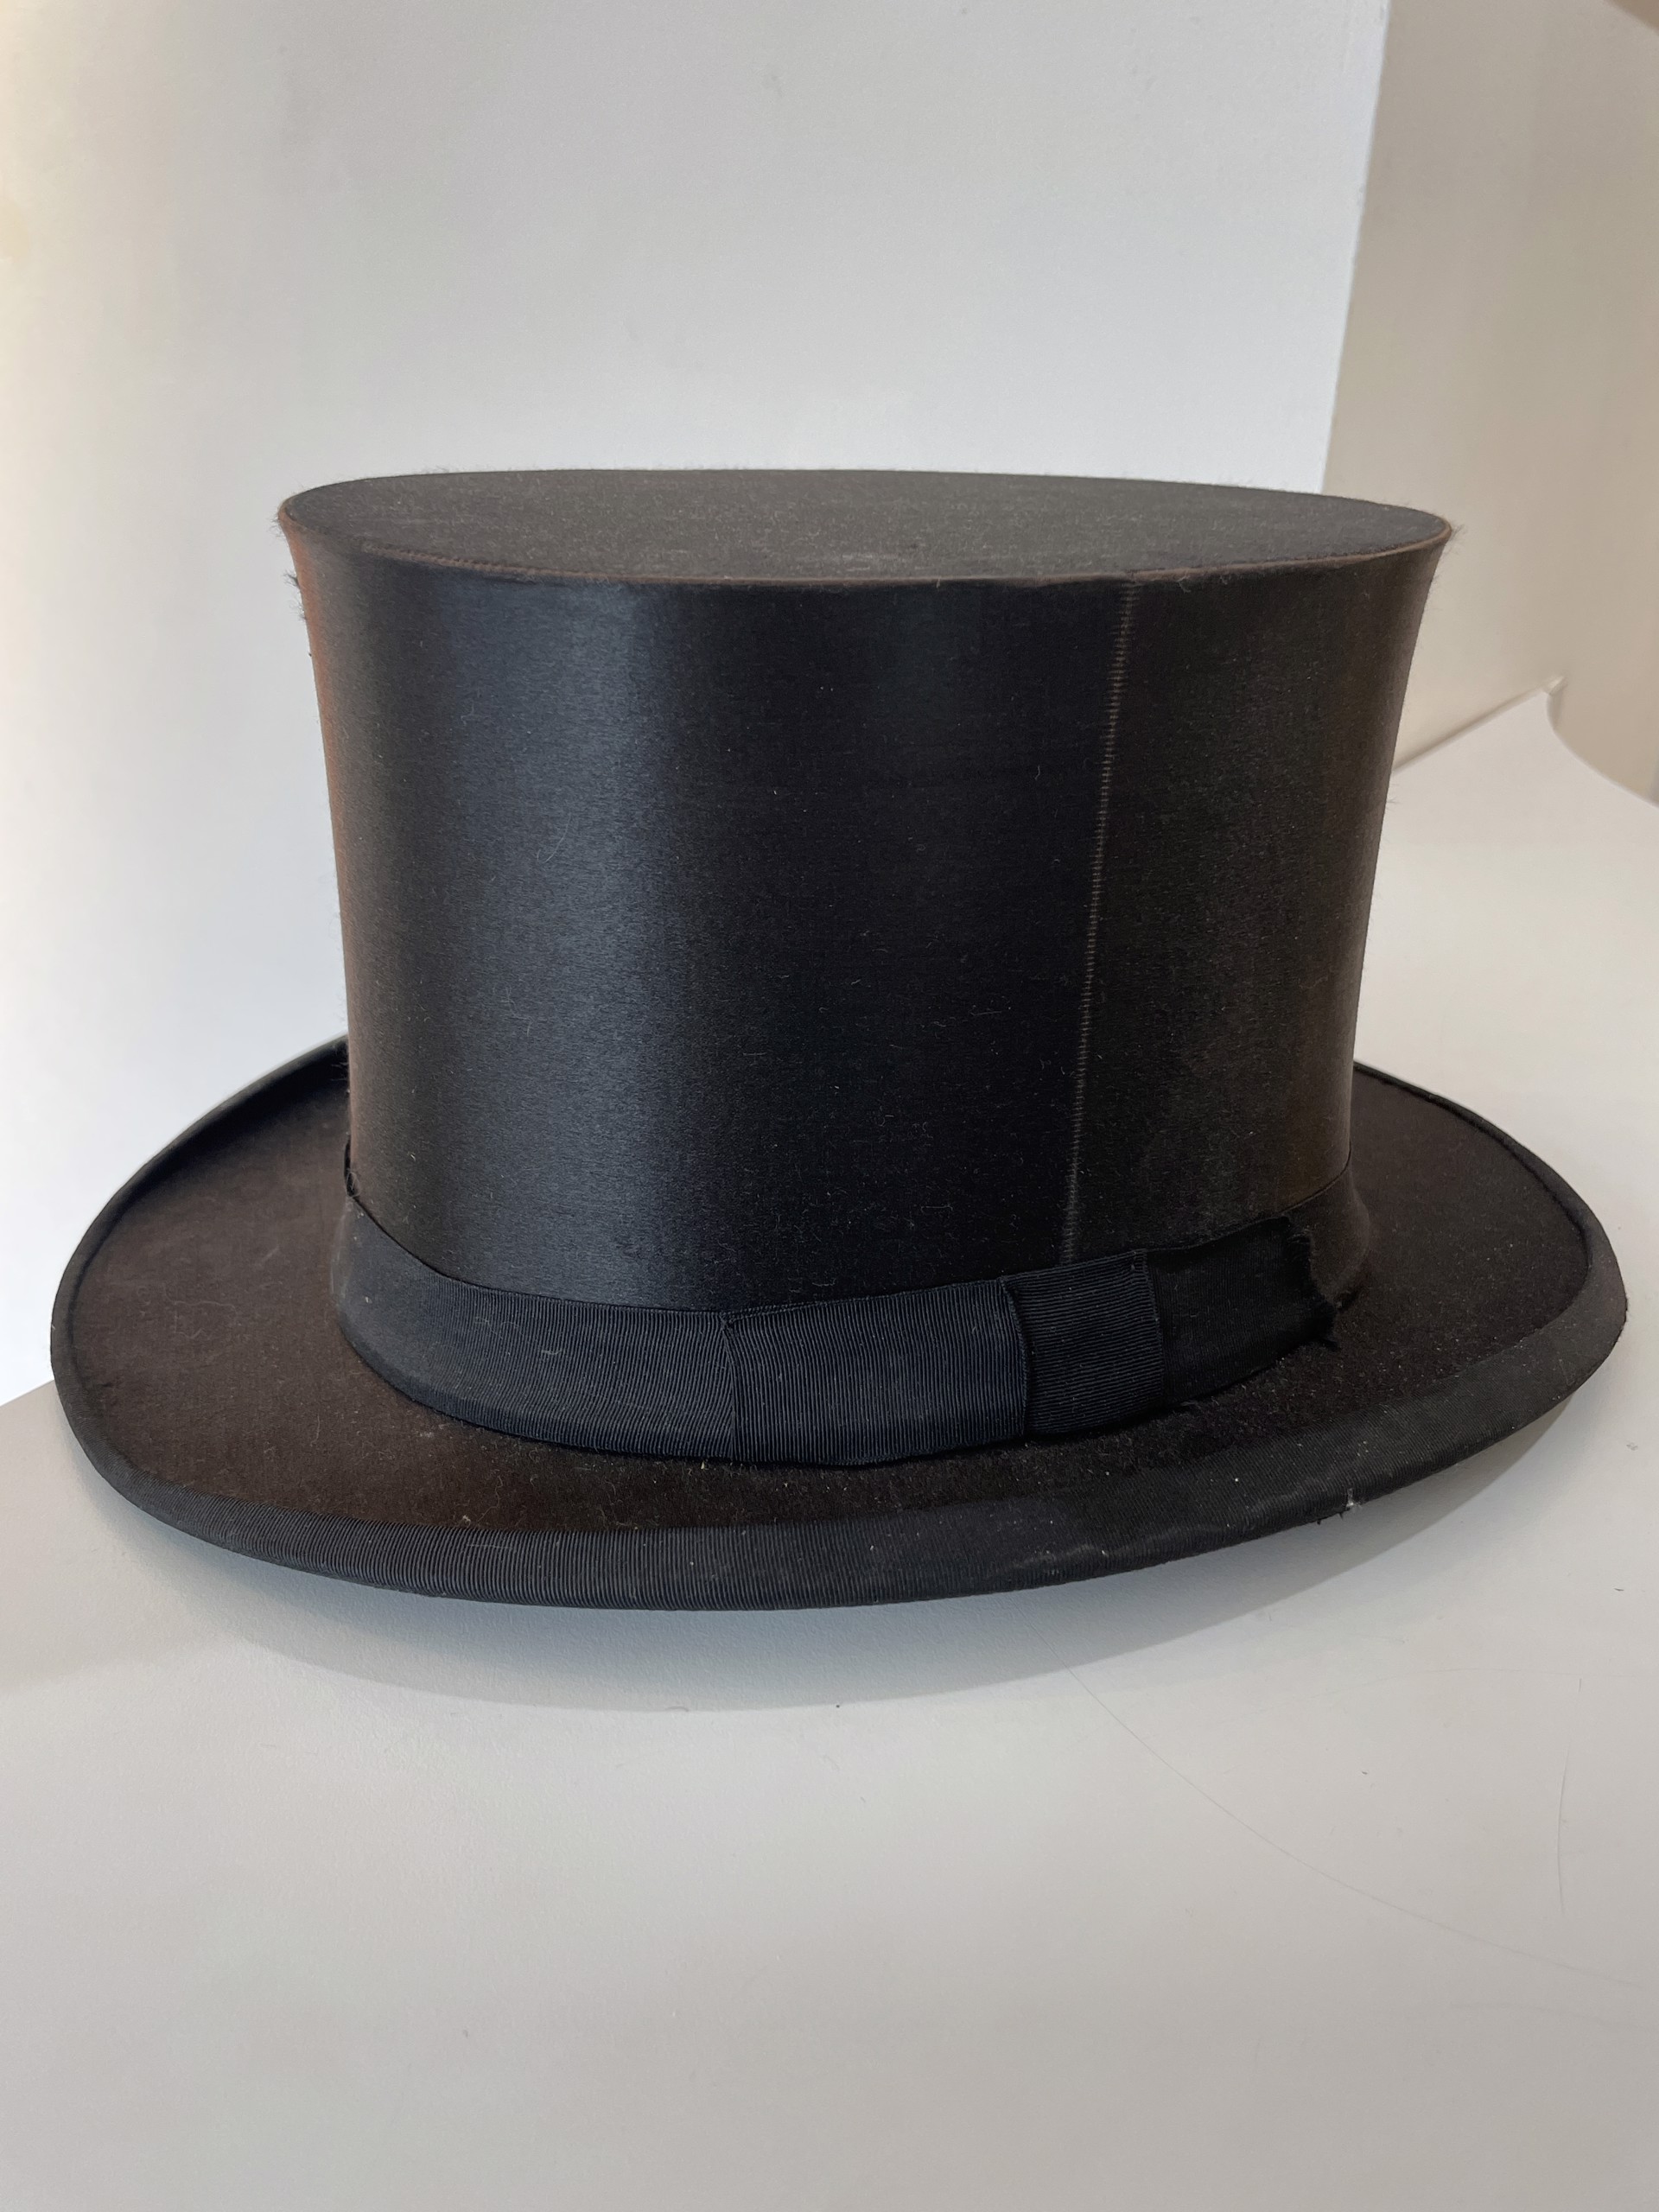 Top Hat by Andy Warhol